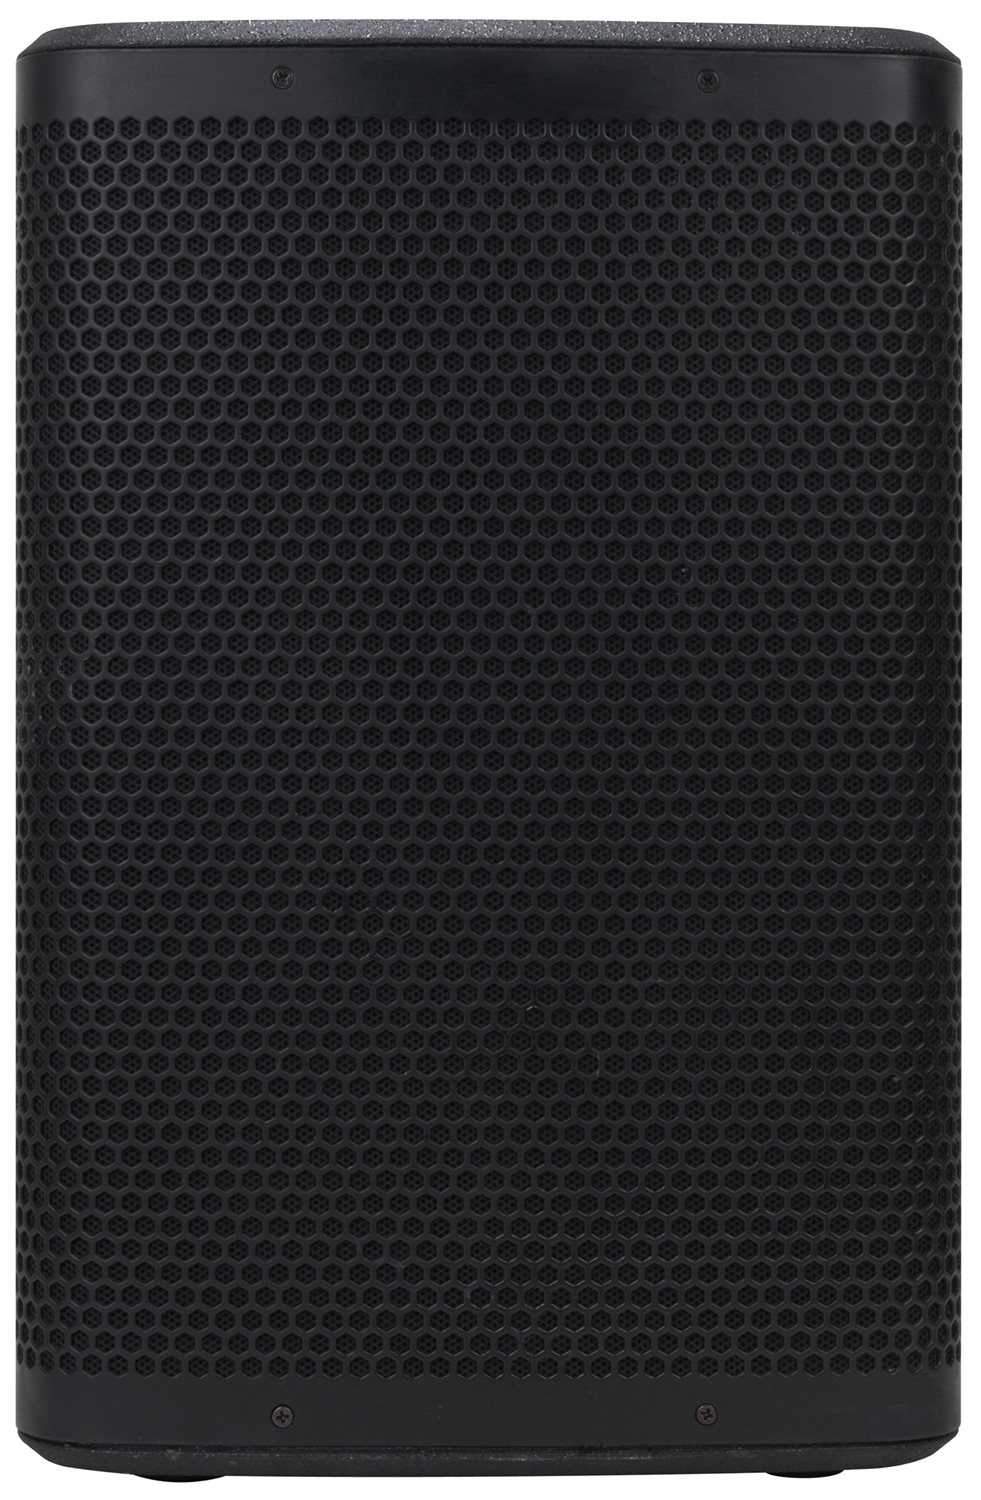 American Audio CPX 10A 10-Inch Powered Speaker - ProSound and Stage Lighting